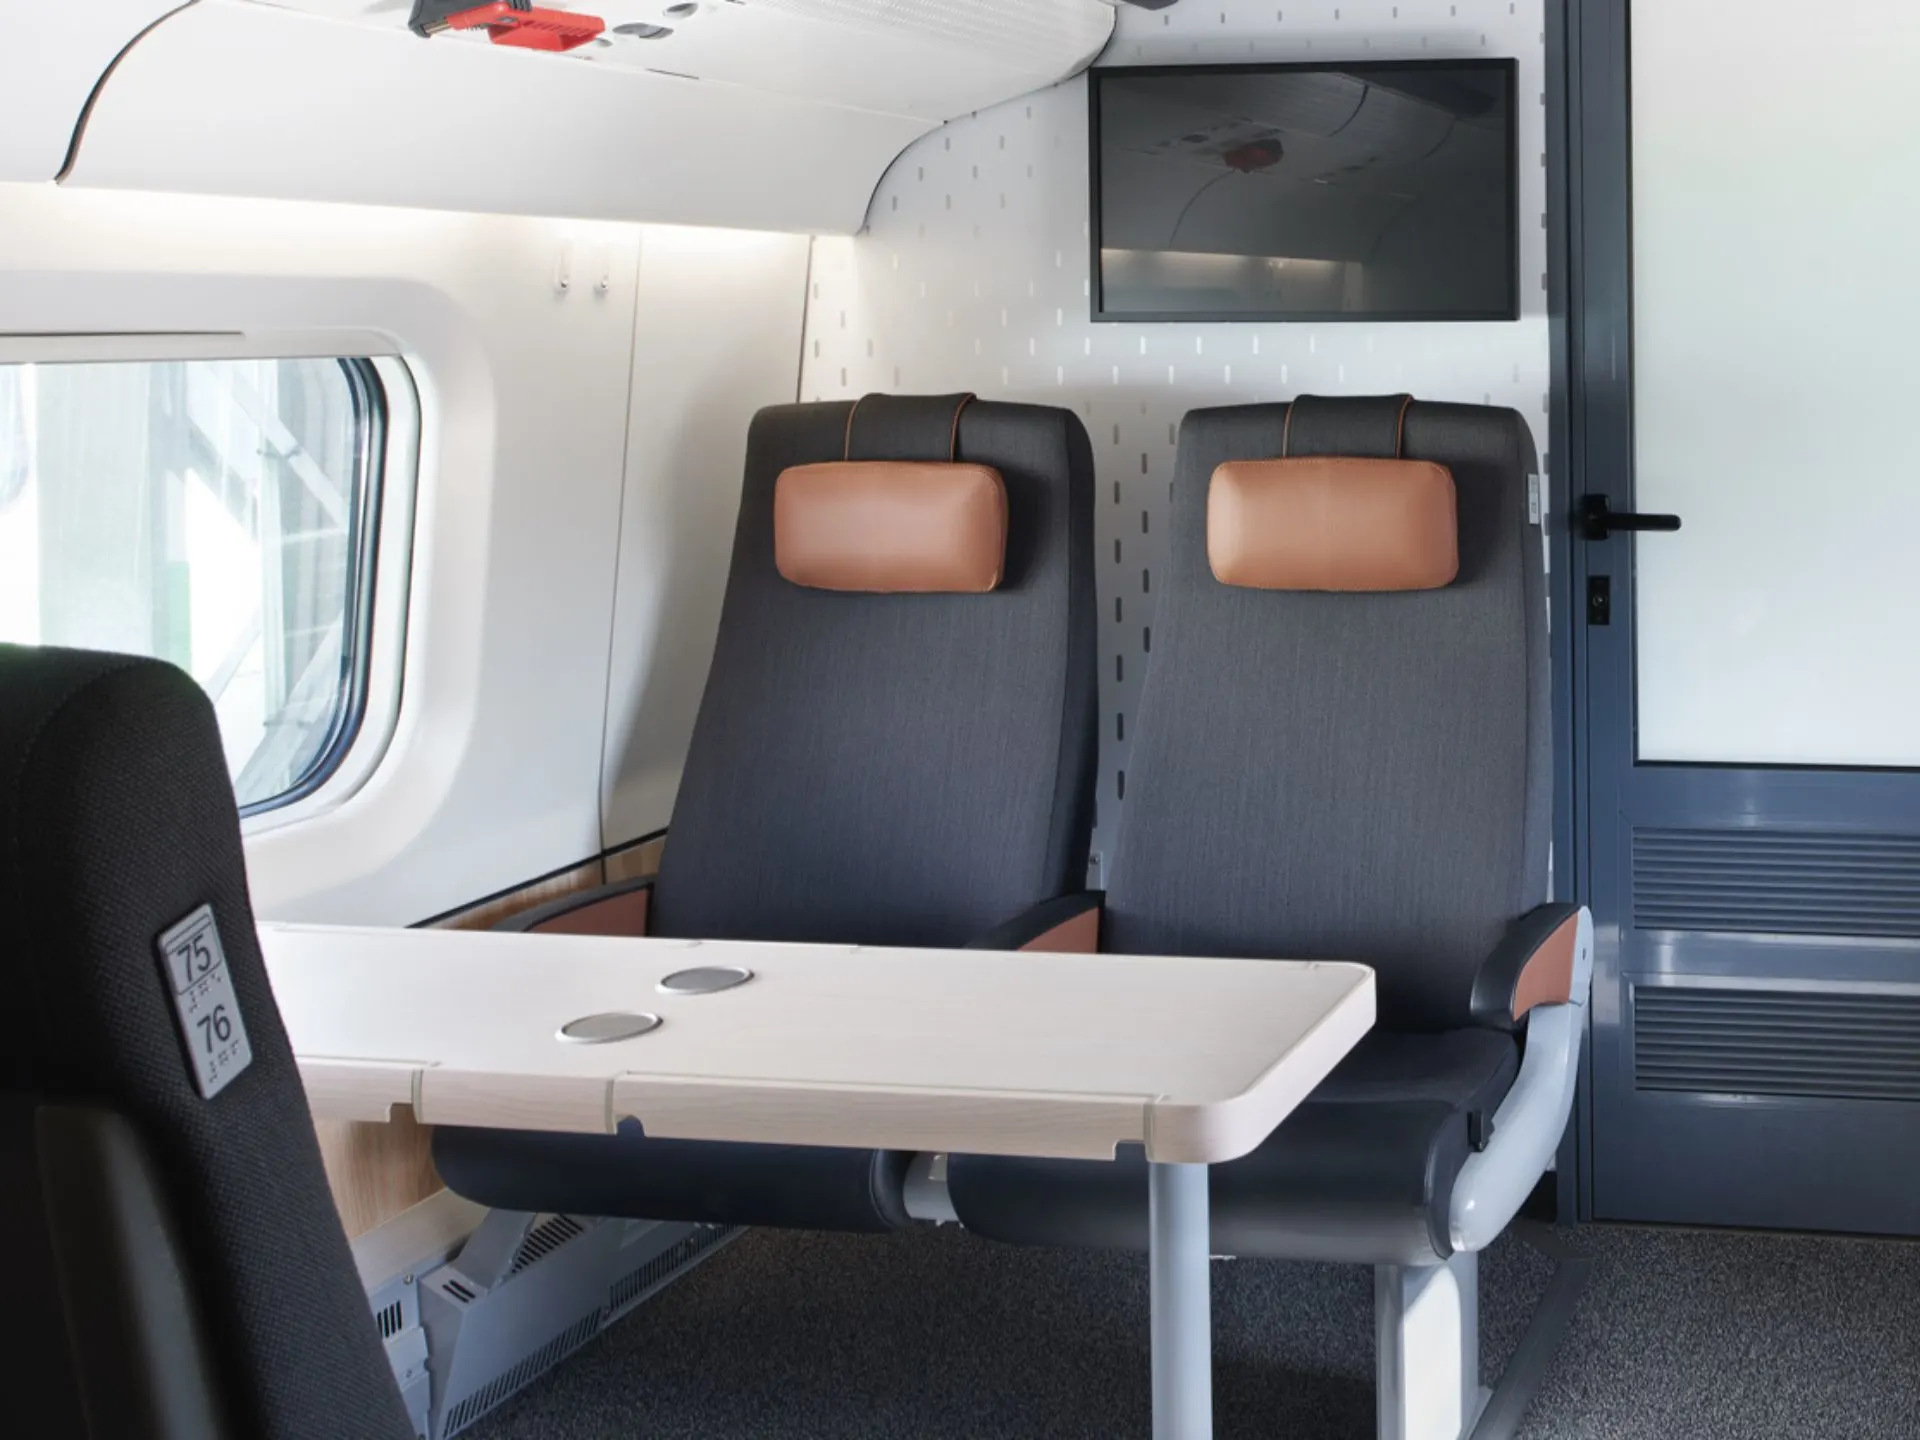 Own compartment or an empty seat next to you